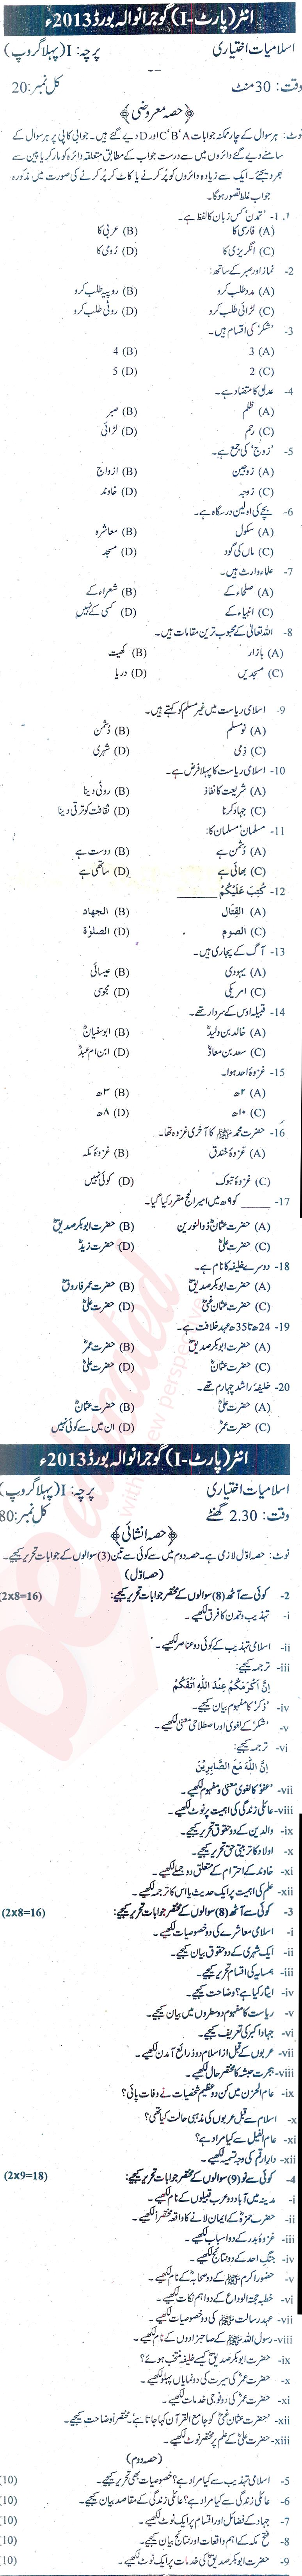 Islamiat Elective FA Part 1 Past Paper Group 1 BISE Gujranwala 2013